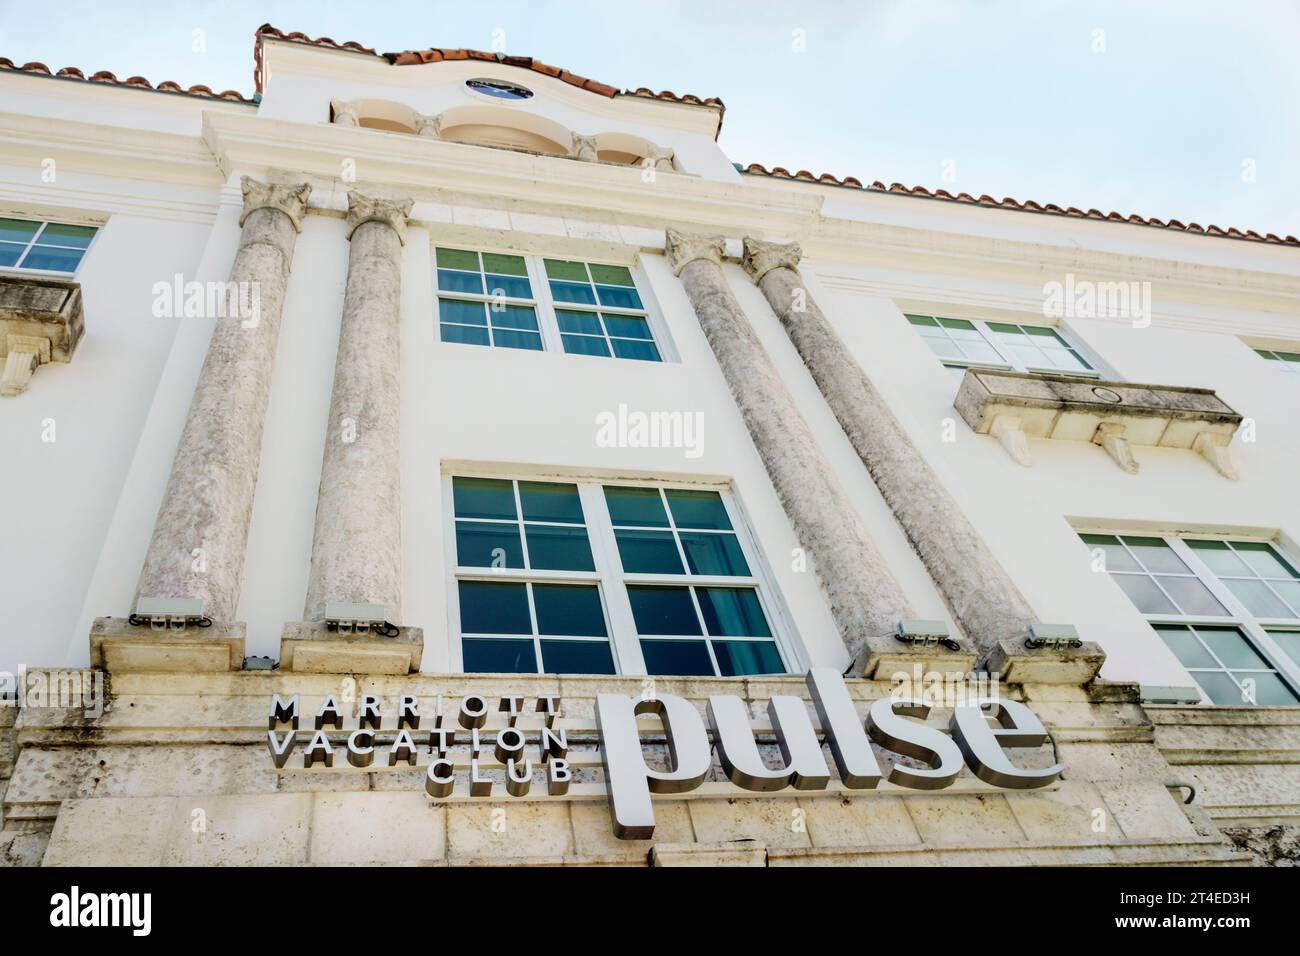 Miami Beach Florida,outside exterior,building front entrance hotel,Ocean Drive Marriott Vacation Club Pulse,South Beach sign,hotels motels businesses Stock Photo